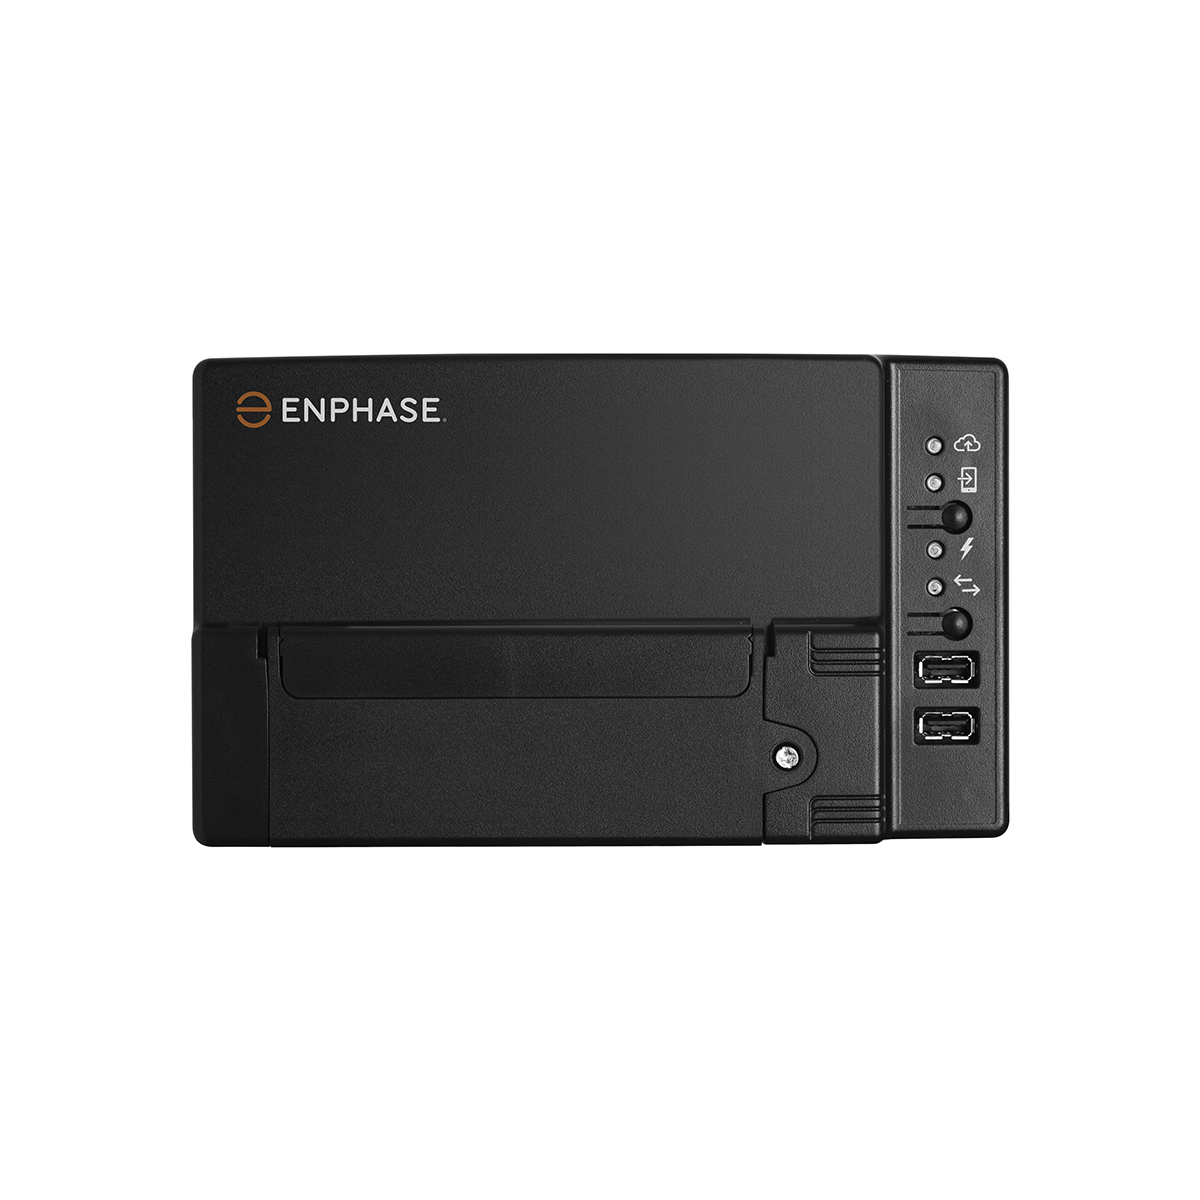 19x Sunpower P6 7695 wp met Enphase IQ8A en Accu 1x N Charge 10T,1 x N Charge 3T